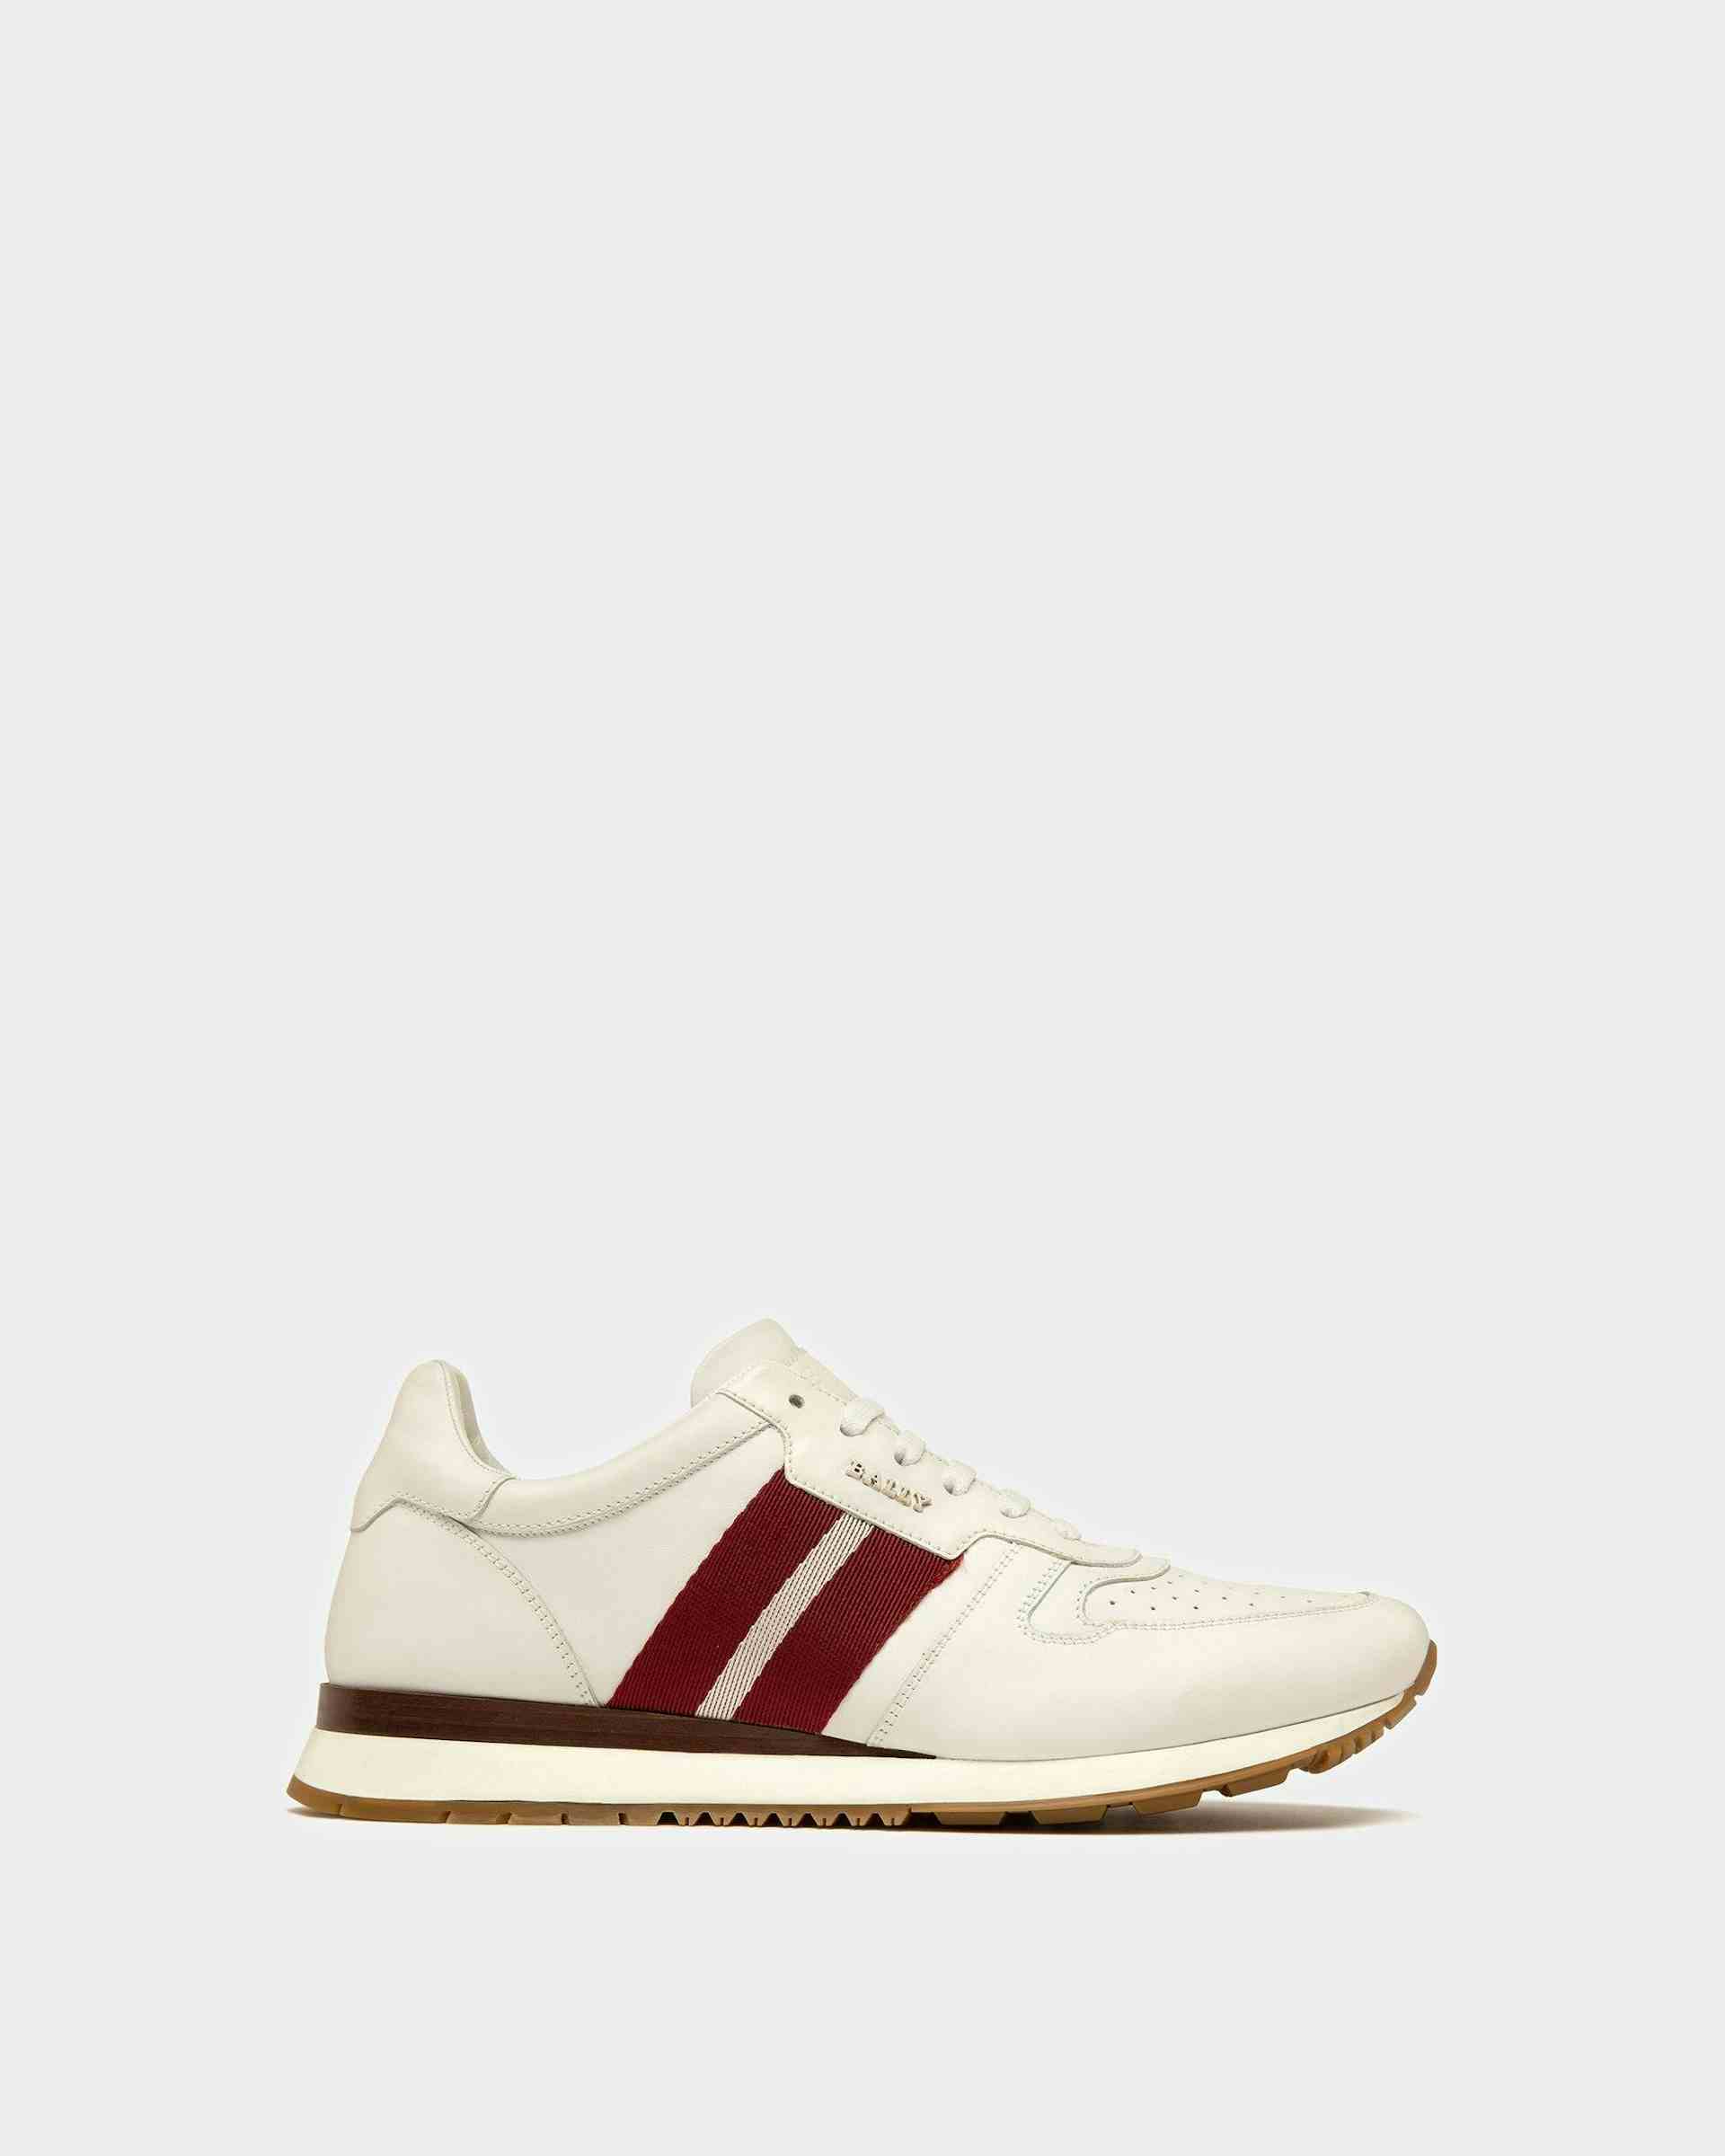 Astel Leather Sneakers In White - Men's - Bally